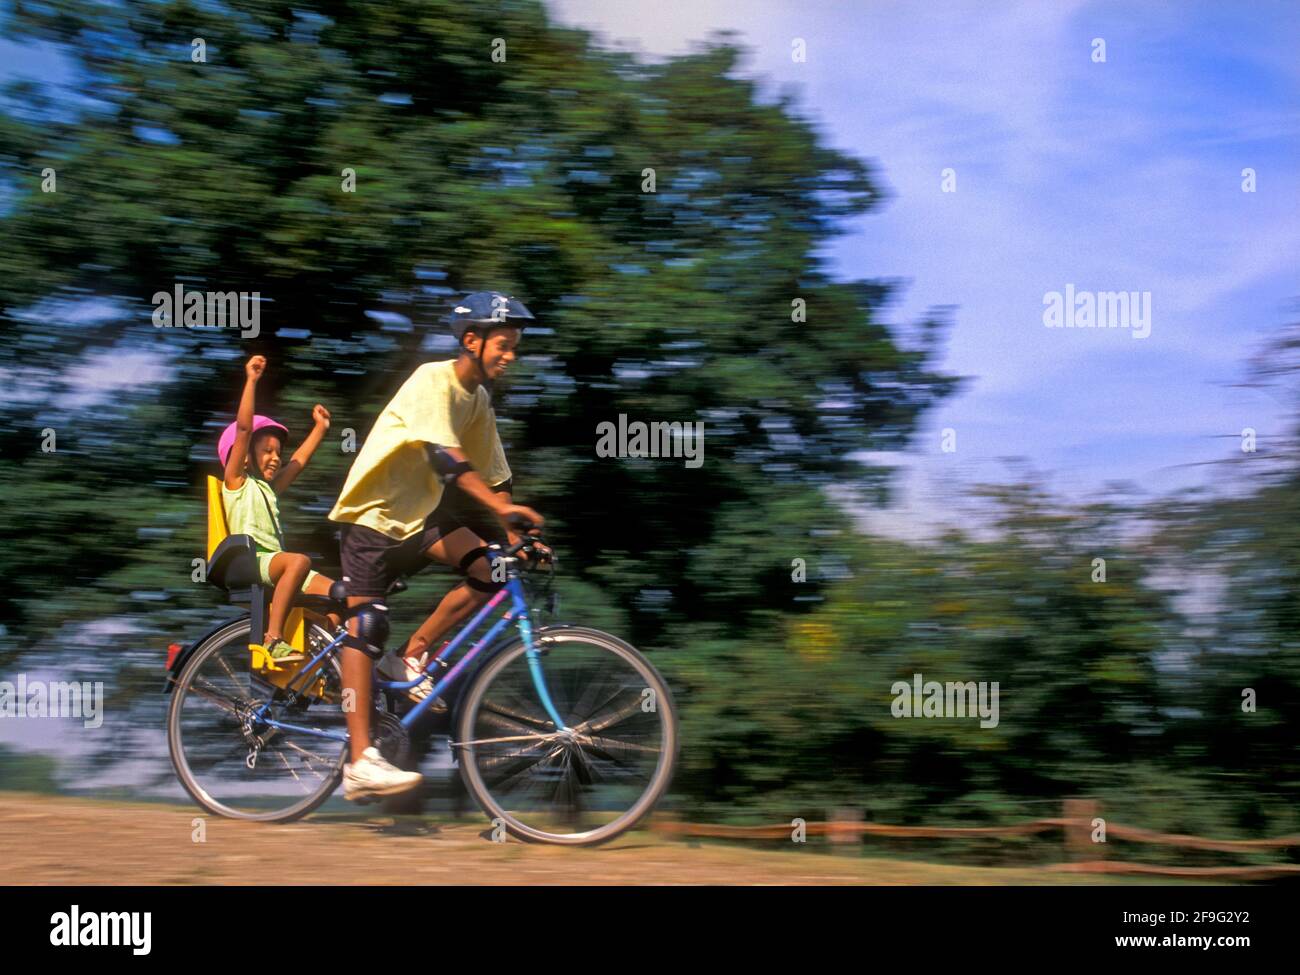 Staycation summer holiday fun UK Brother & Sister 14 years and 4 years British African Caribbean (Afro Caribbean) ethnicity, outside together enjoying a fun exhilarating safe off road summer bicycle ride Stock Photo